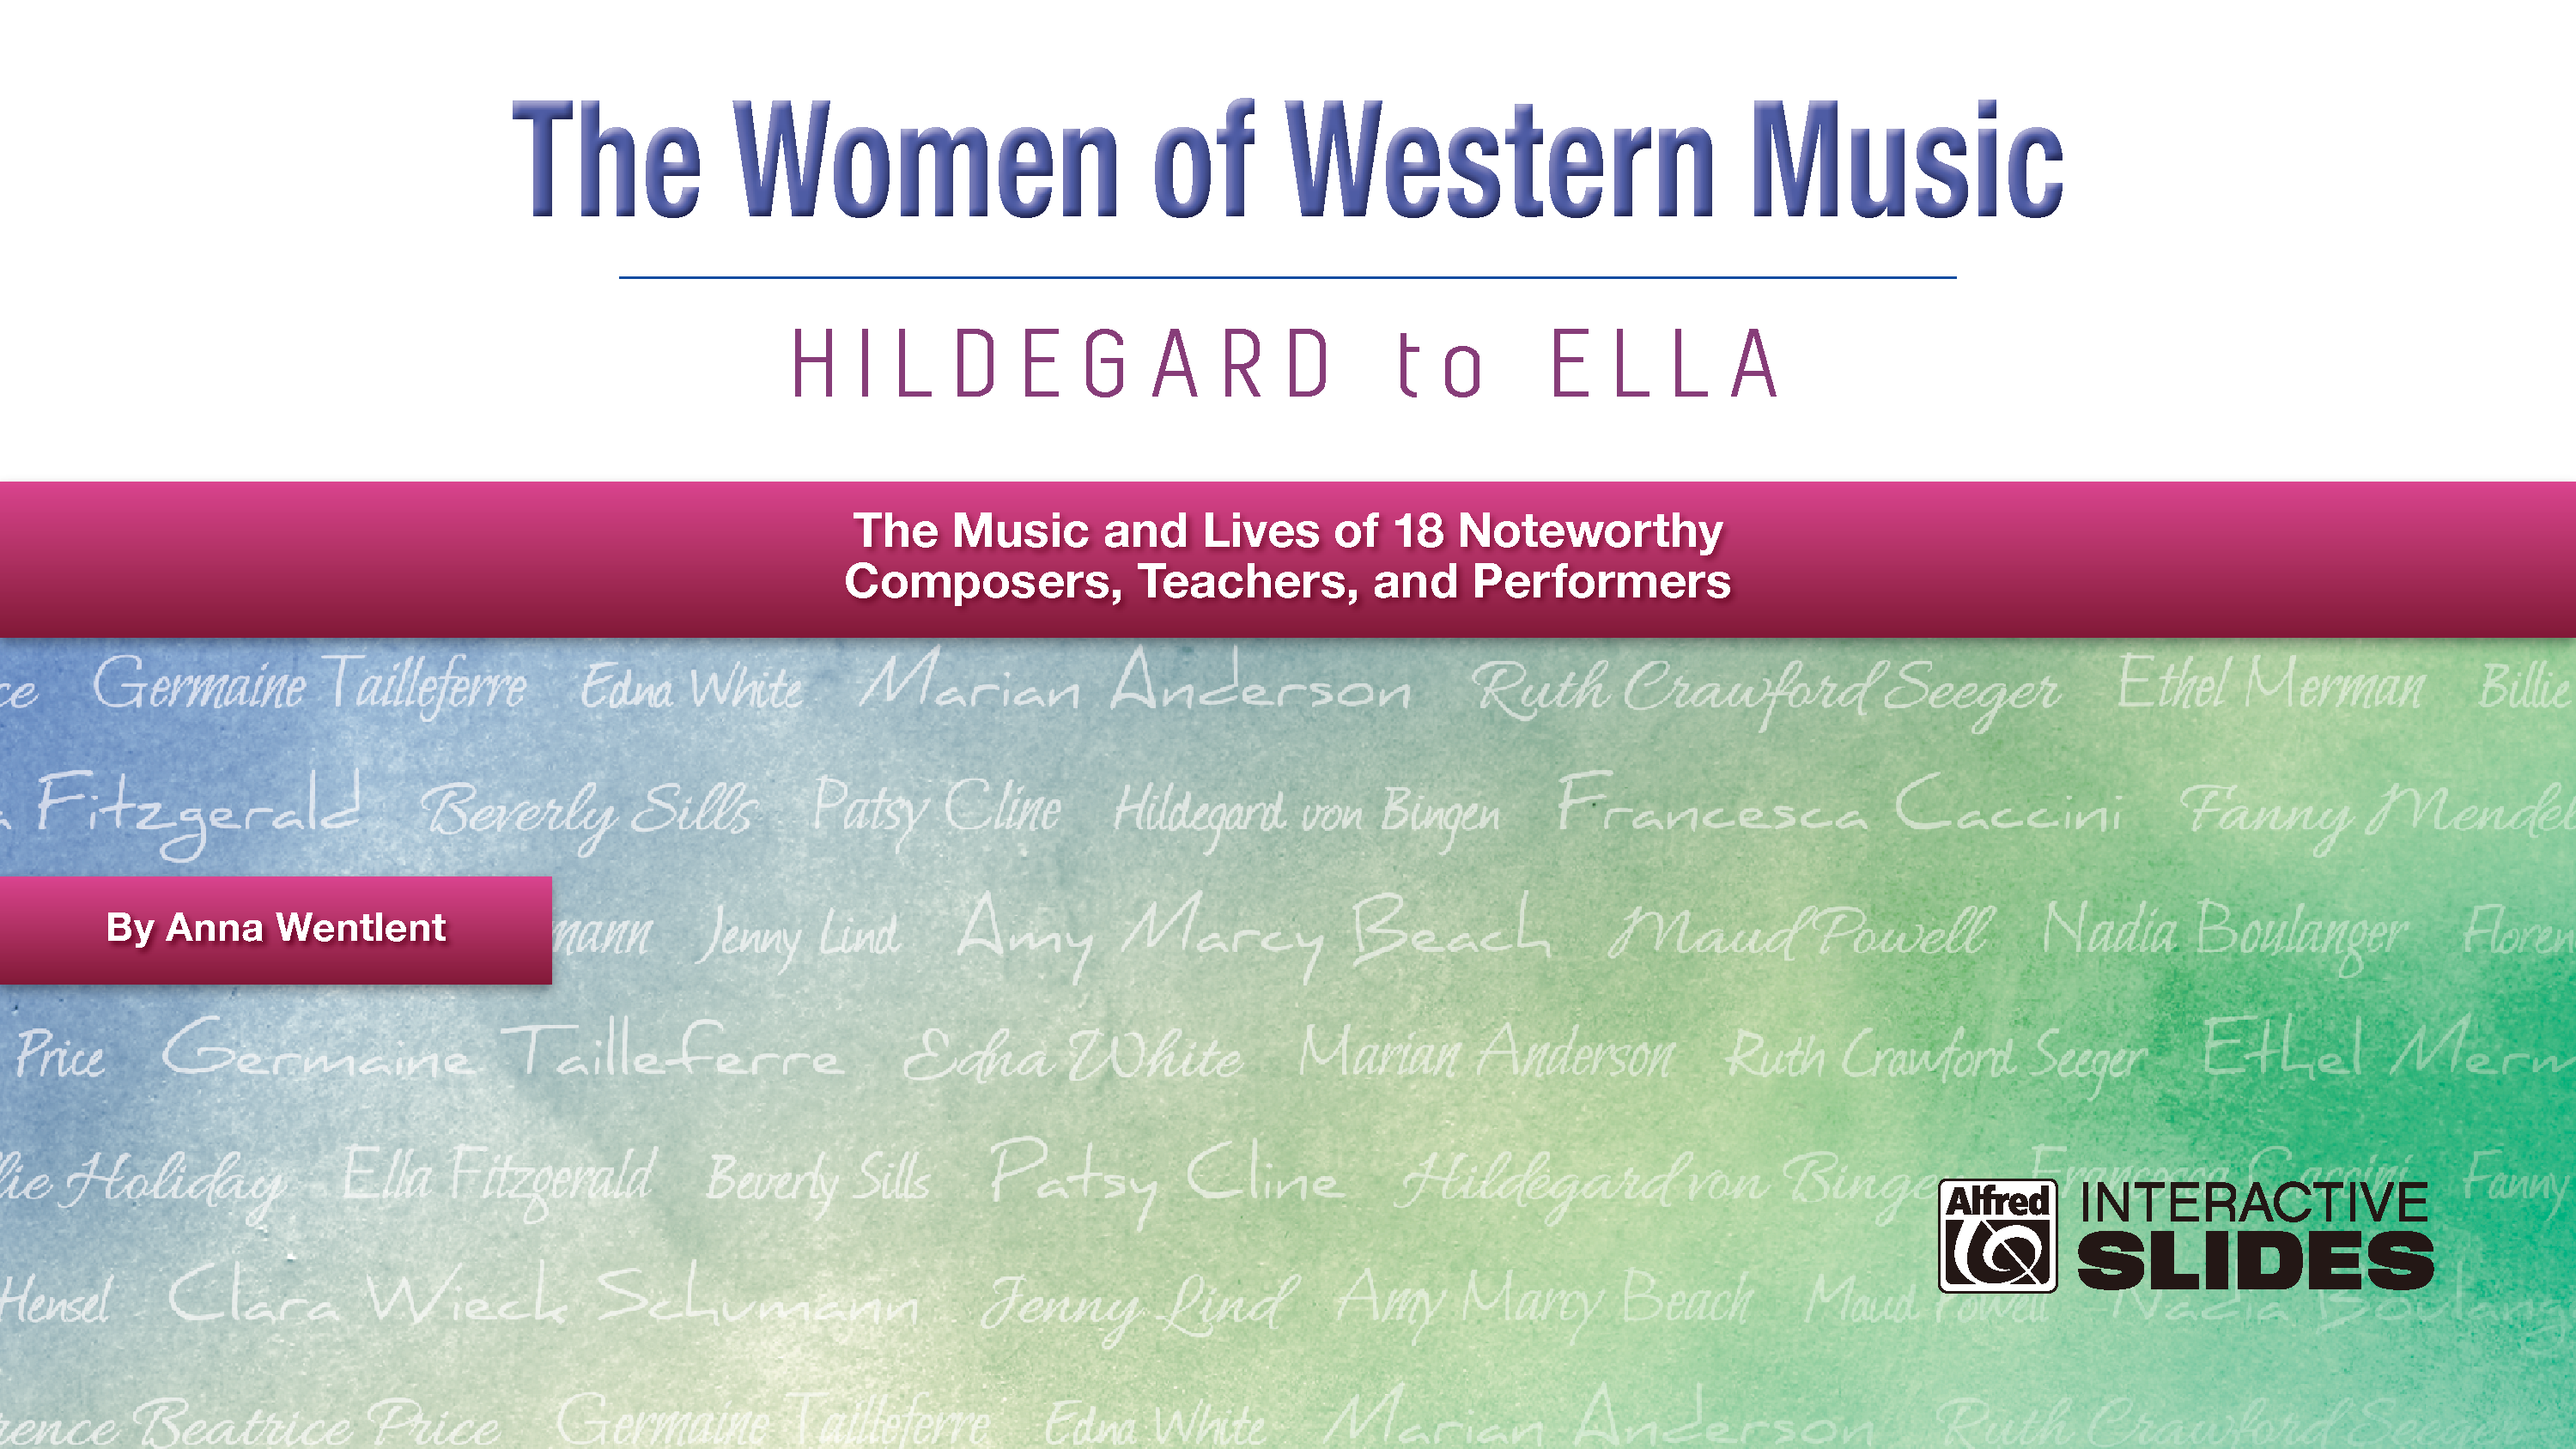 The Women of Western Music